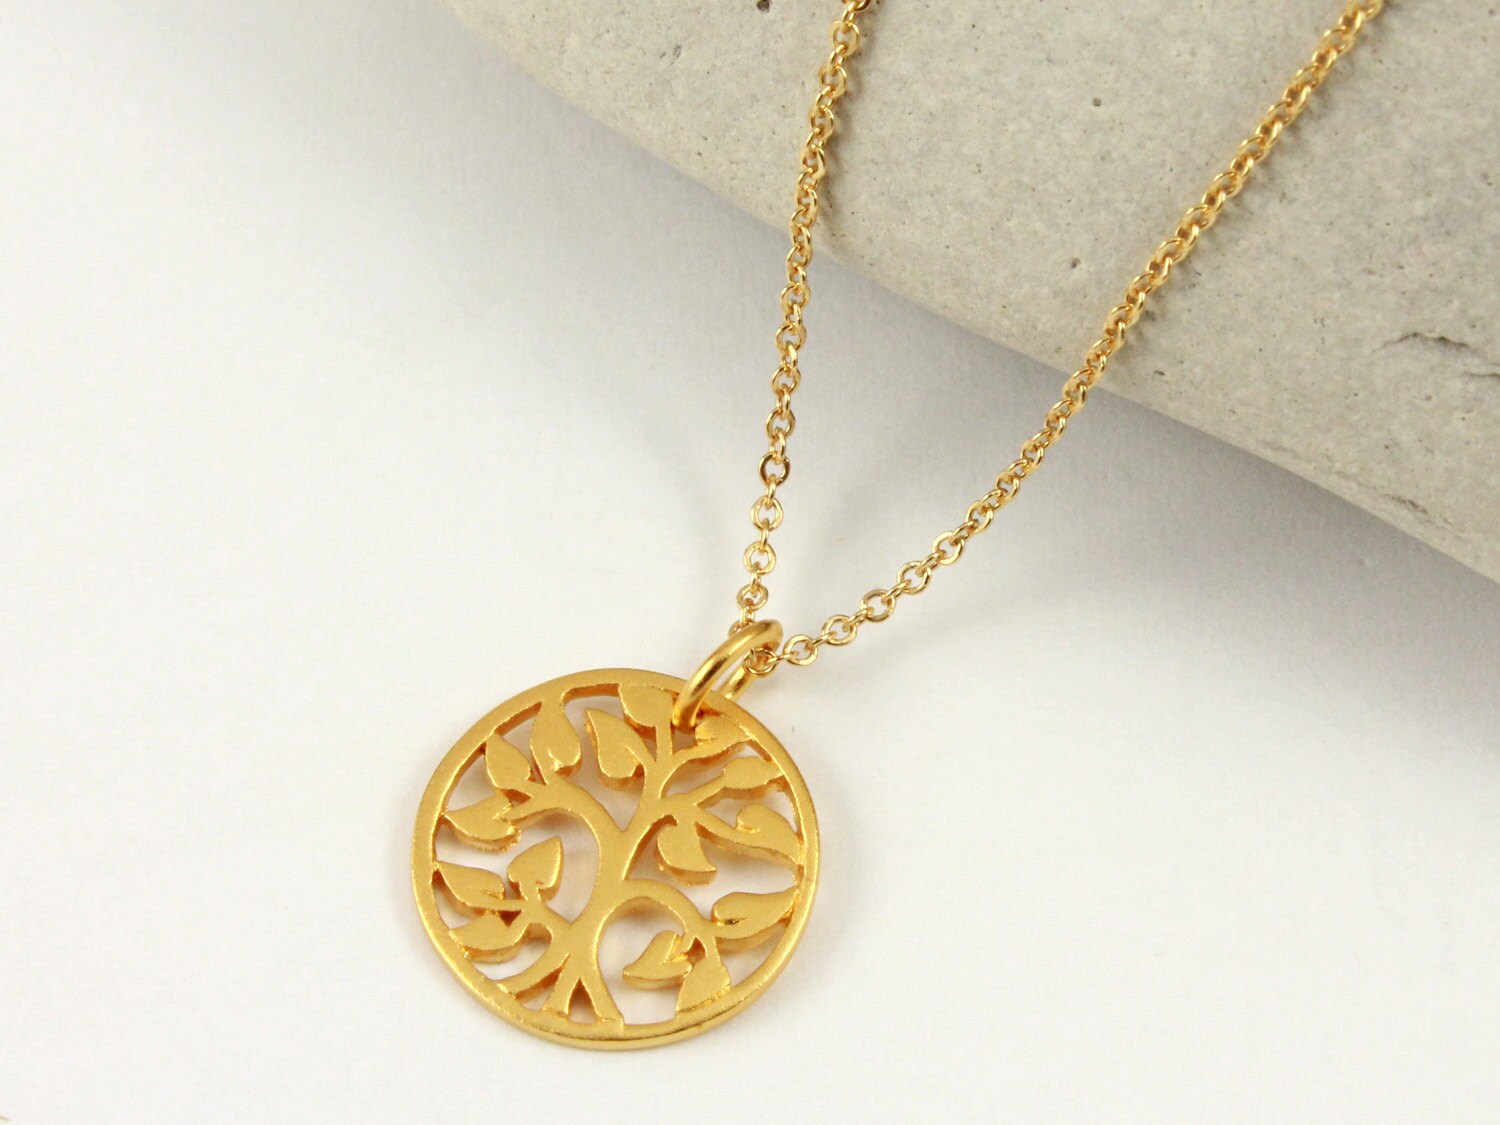 Family Tree Necklace Goldfilled Tree of Life by LiansElegance